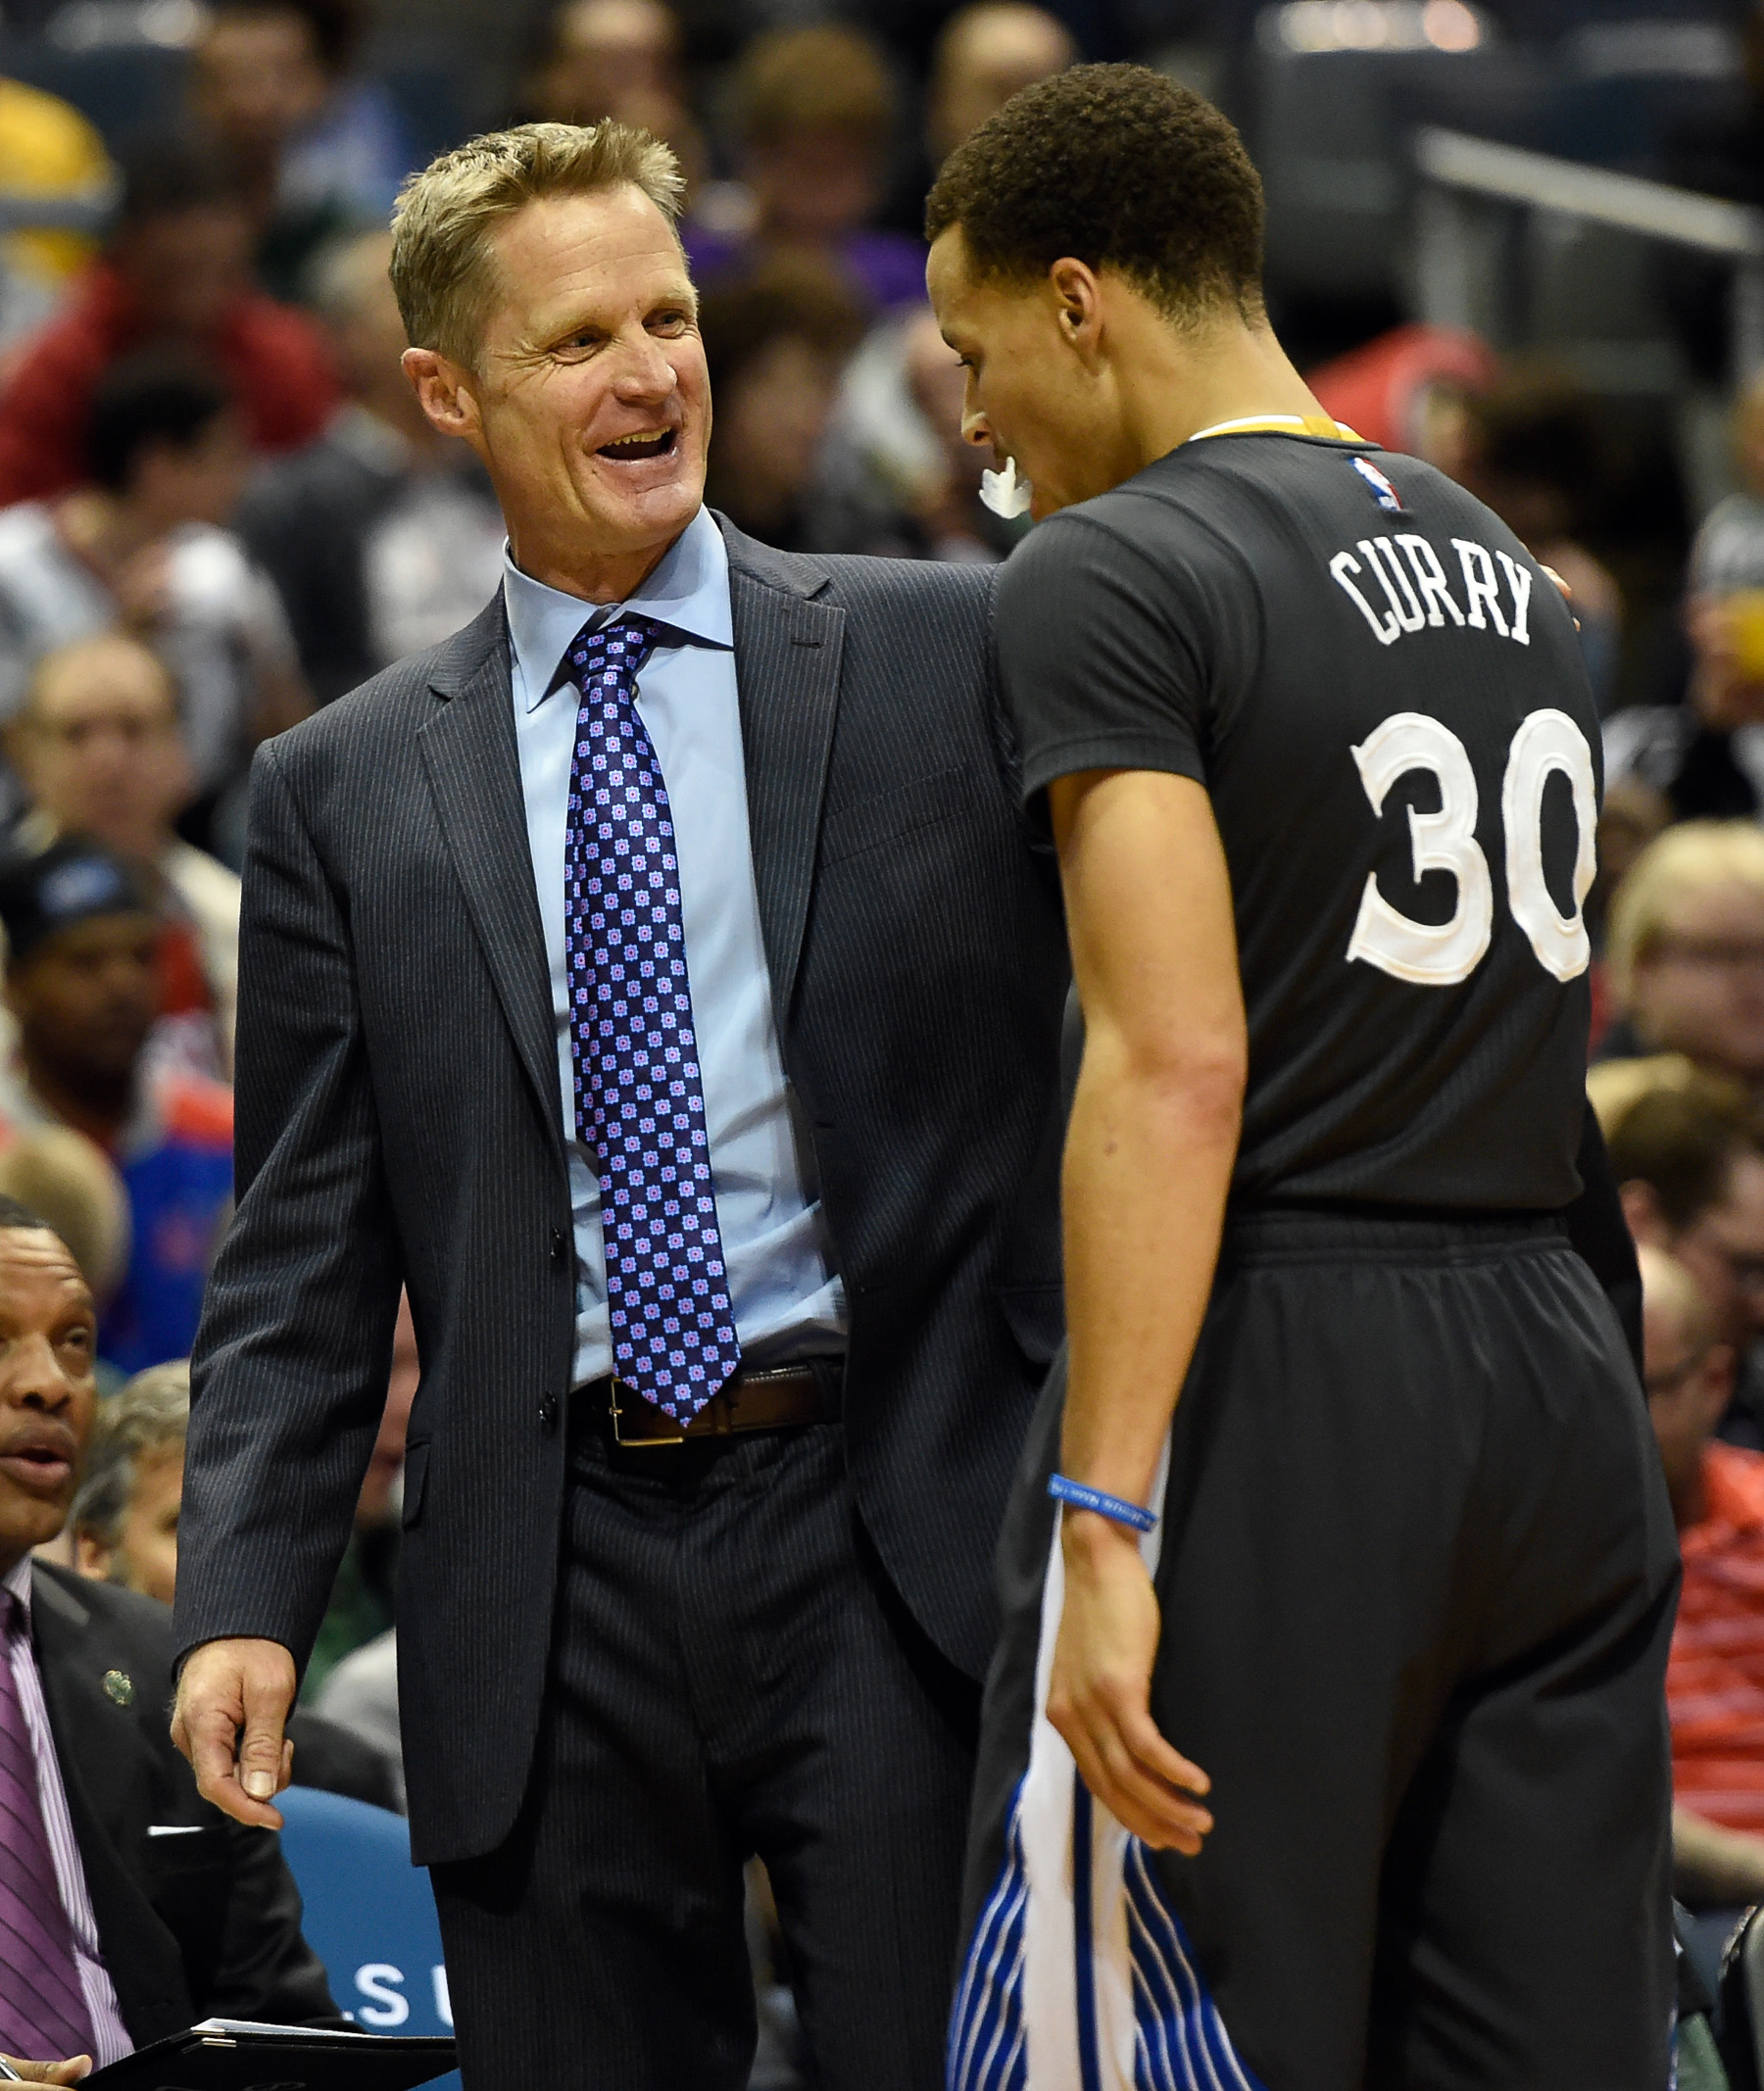 Mar 28, 2015; Milwaukee, WI, USA; Golden State Warriors head coach Steve Kerr reacts with guard Stephen Curry (30) in the fourth quarter during the game against the Milwaukee Bucks at BMO Harris Bradley Center. The Warriors beat the Bucks 108-95. (Benny Sieu-USA TODAY Sports)